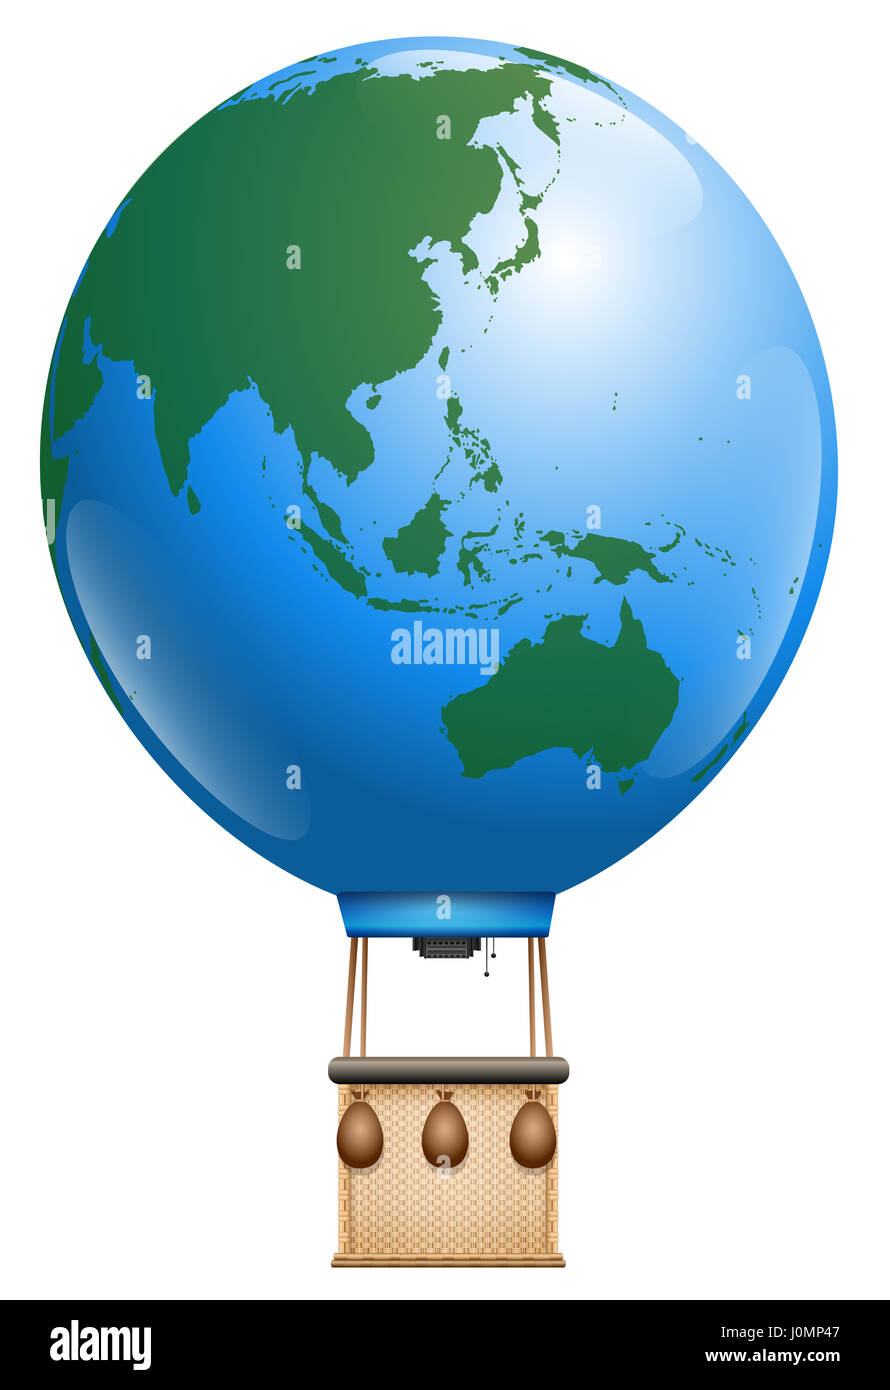 Hot air balloon - planet earth, asia and australia and pacific ocean - symbol for round the world cruise or other global flying tourism issues. Stock Photo